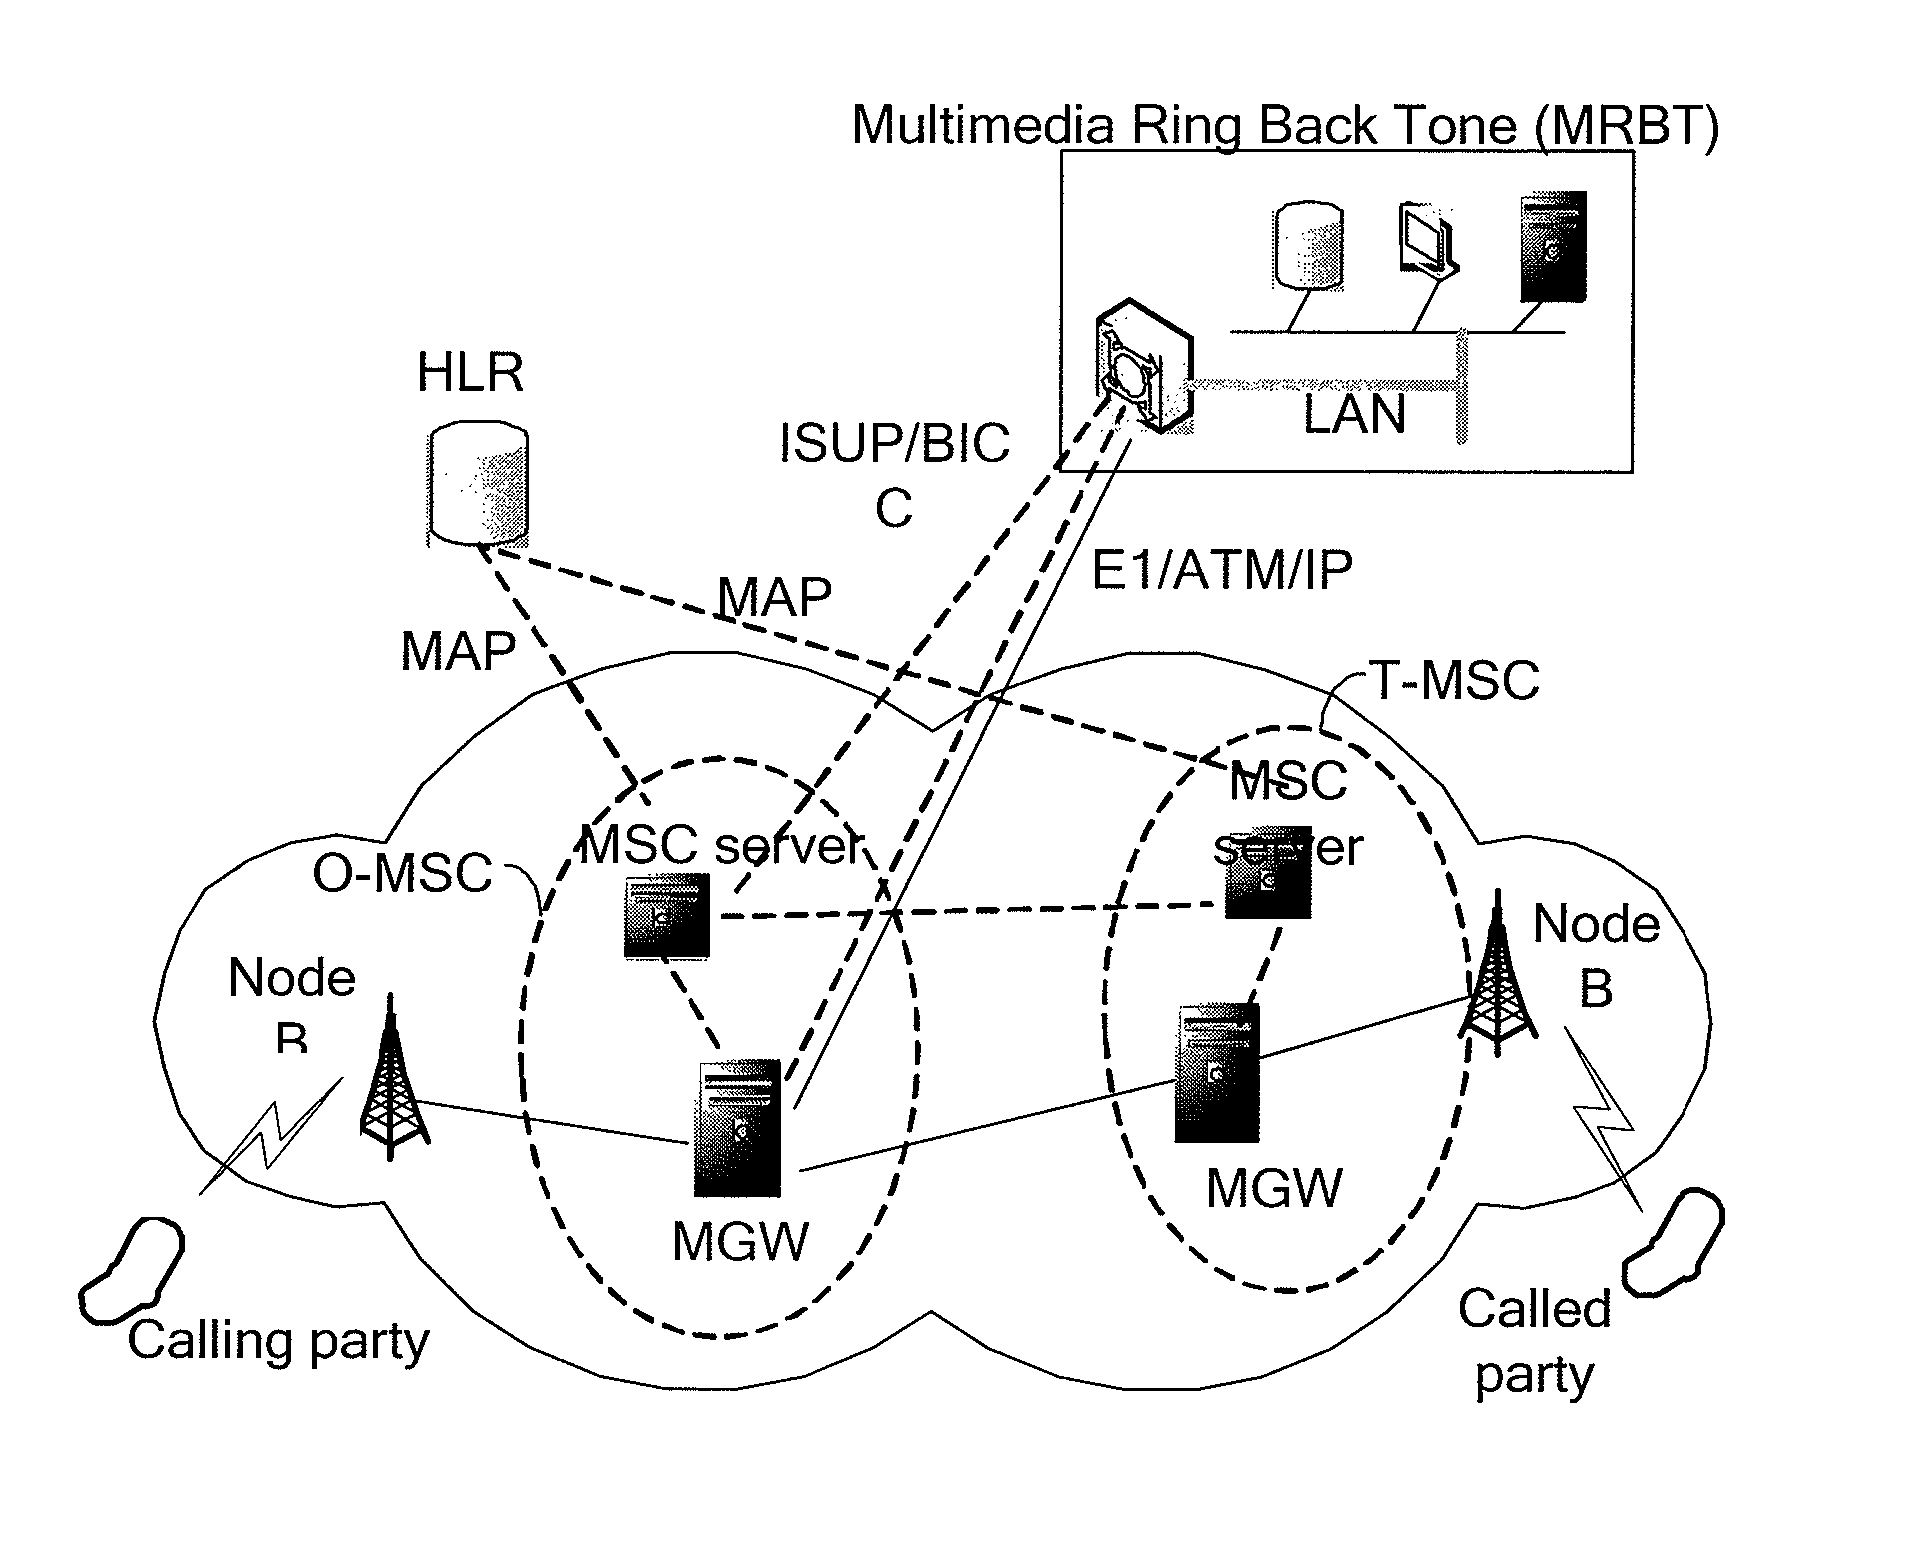 System and method for implementing multimedia ring back tone service